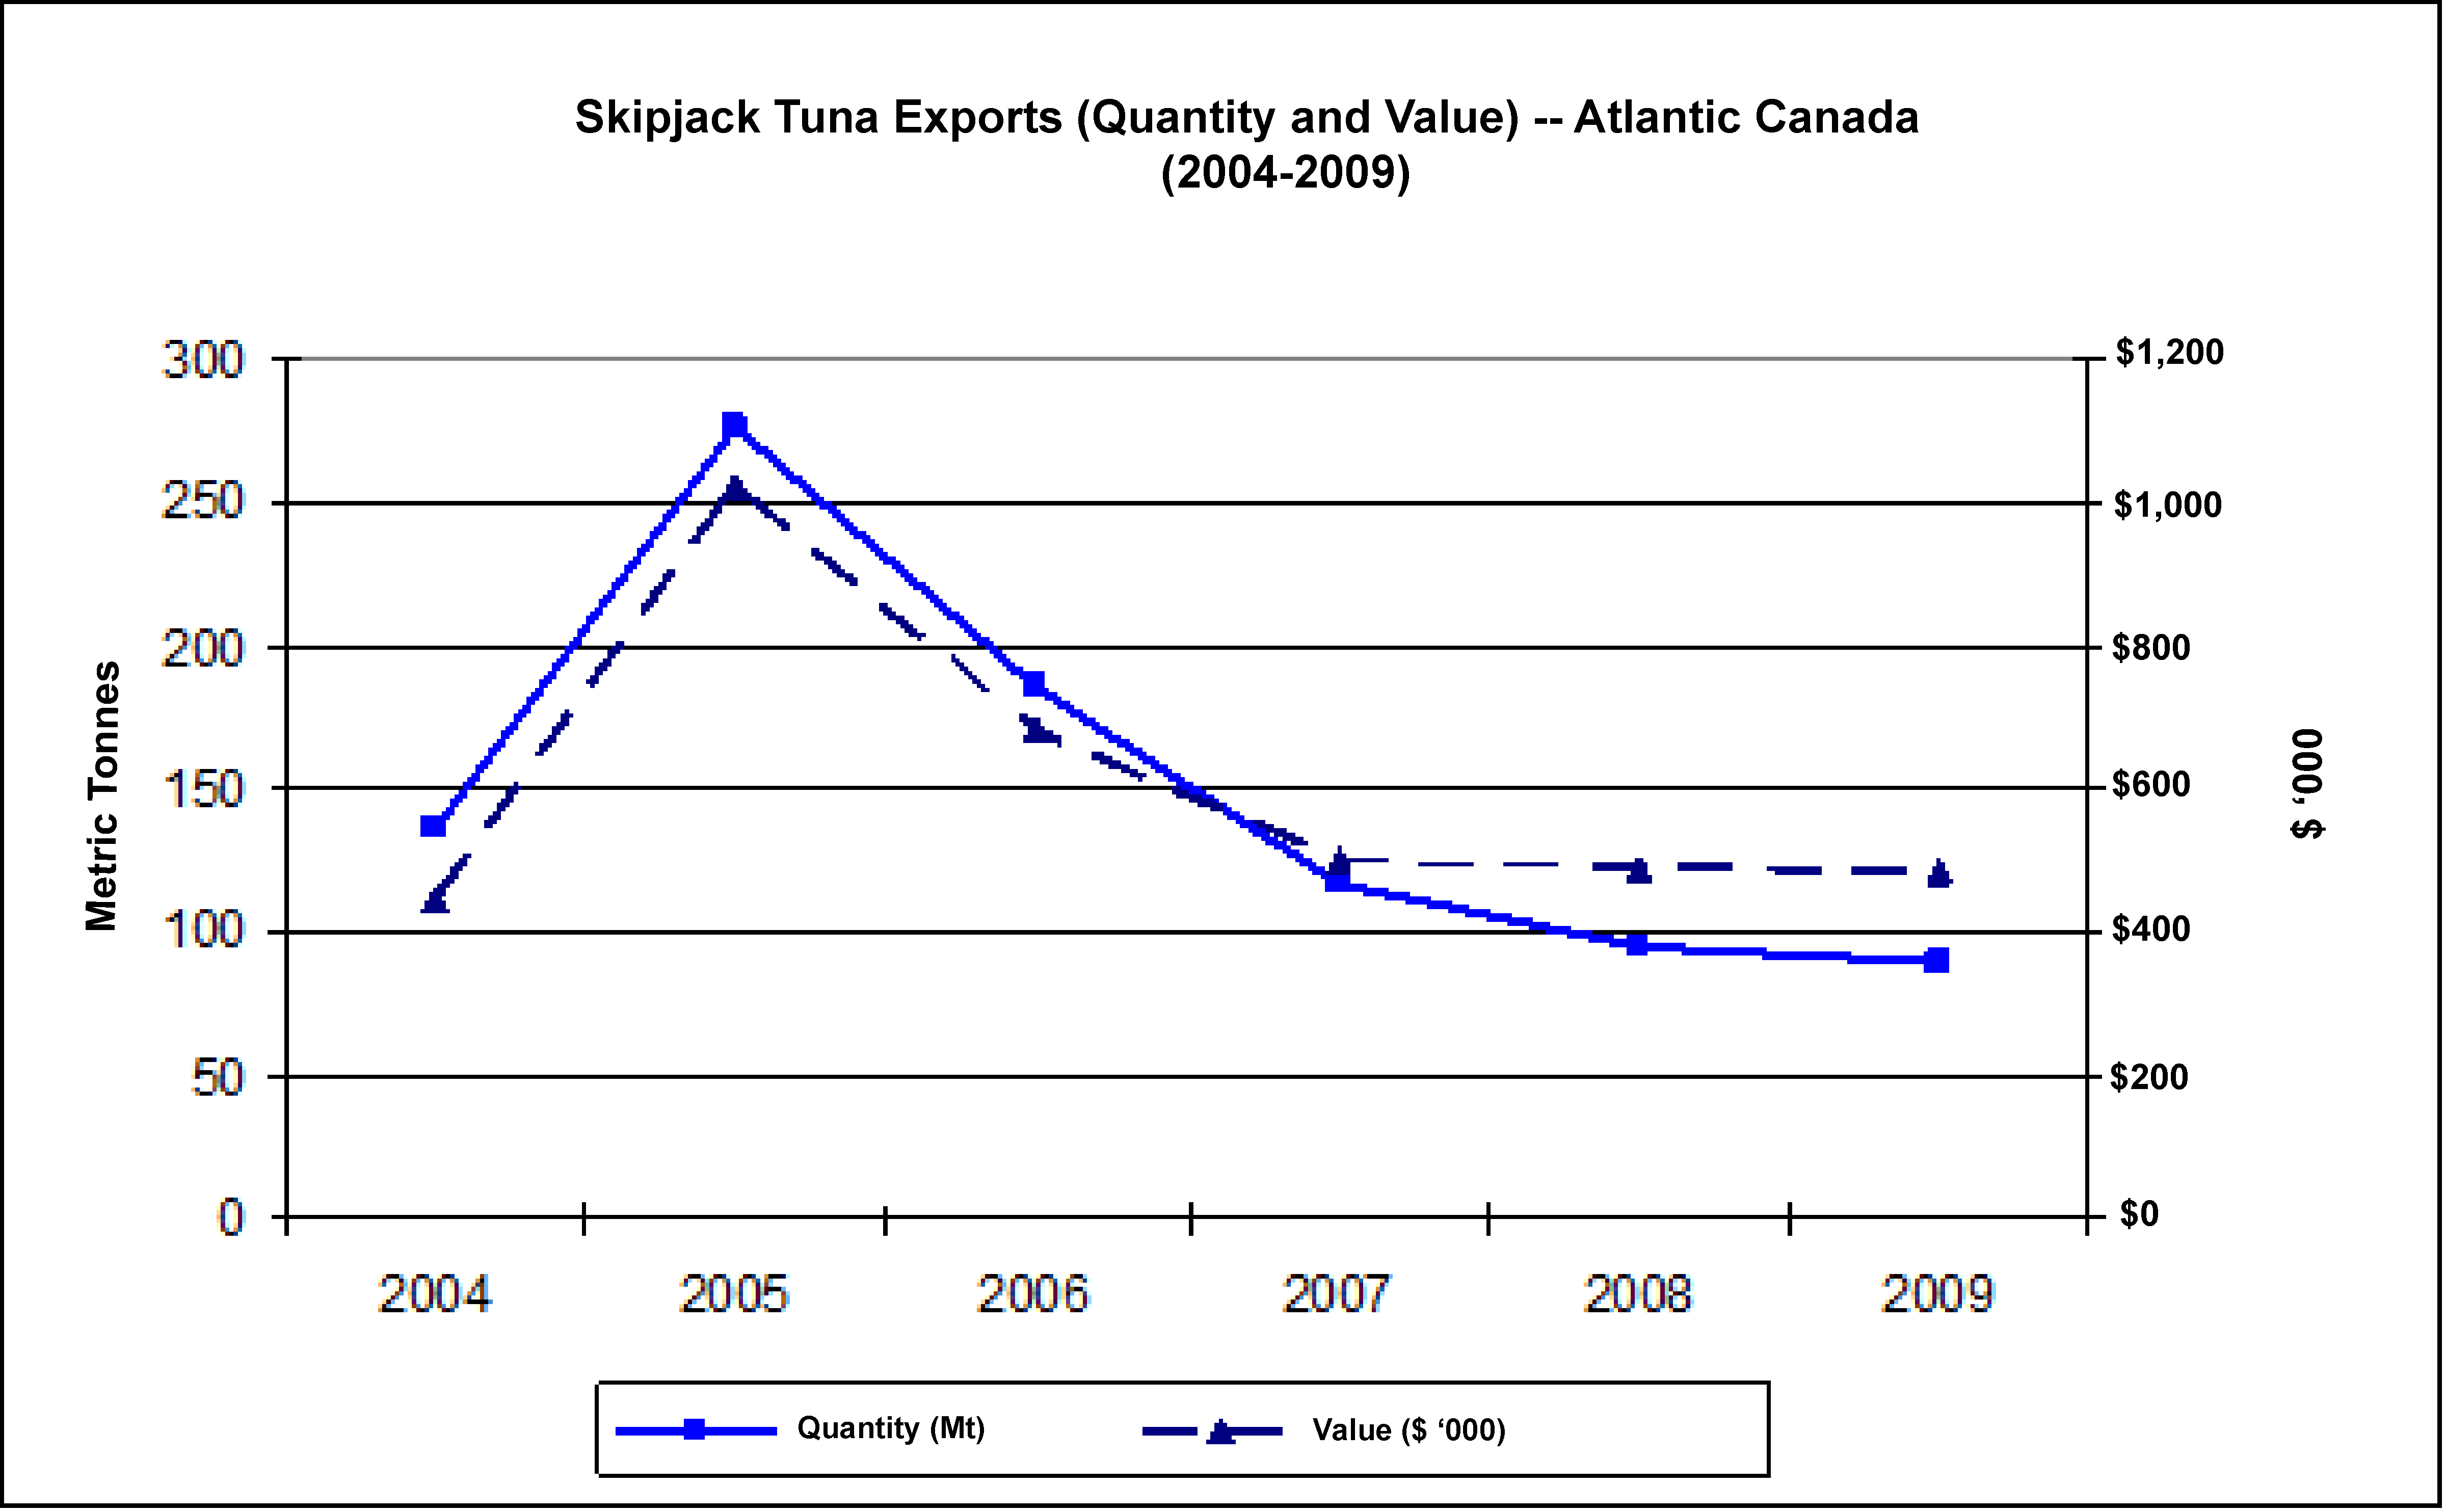 Figure of quantity and value of Skipjack Tuna exports